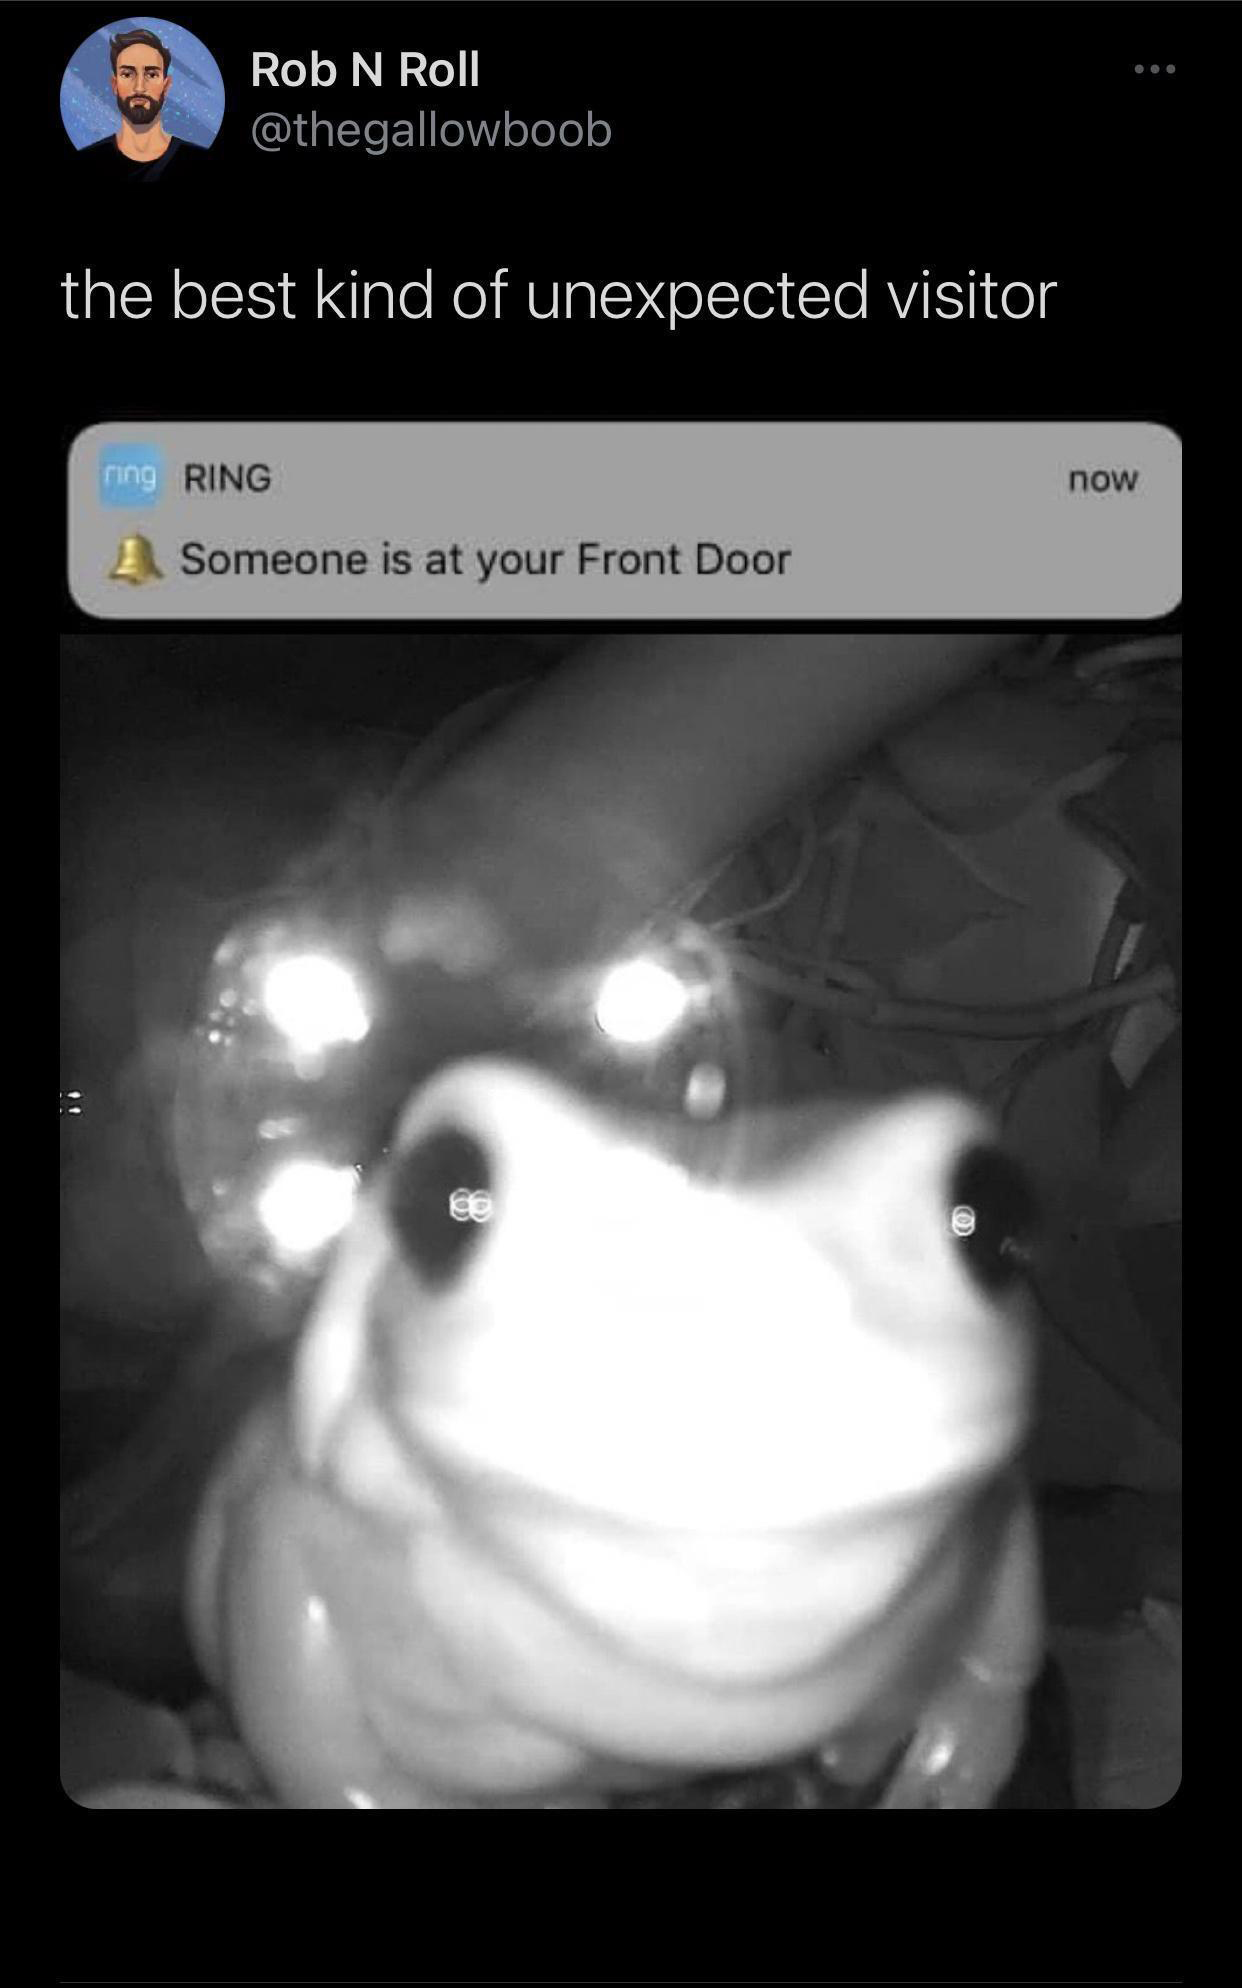 frog memes cute - Rob N Roll the best kind of unexpected visitor ring Ring now Someone is at your Front Door